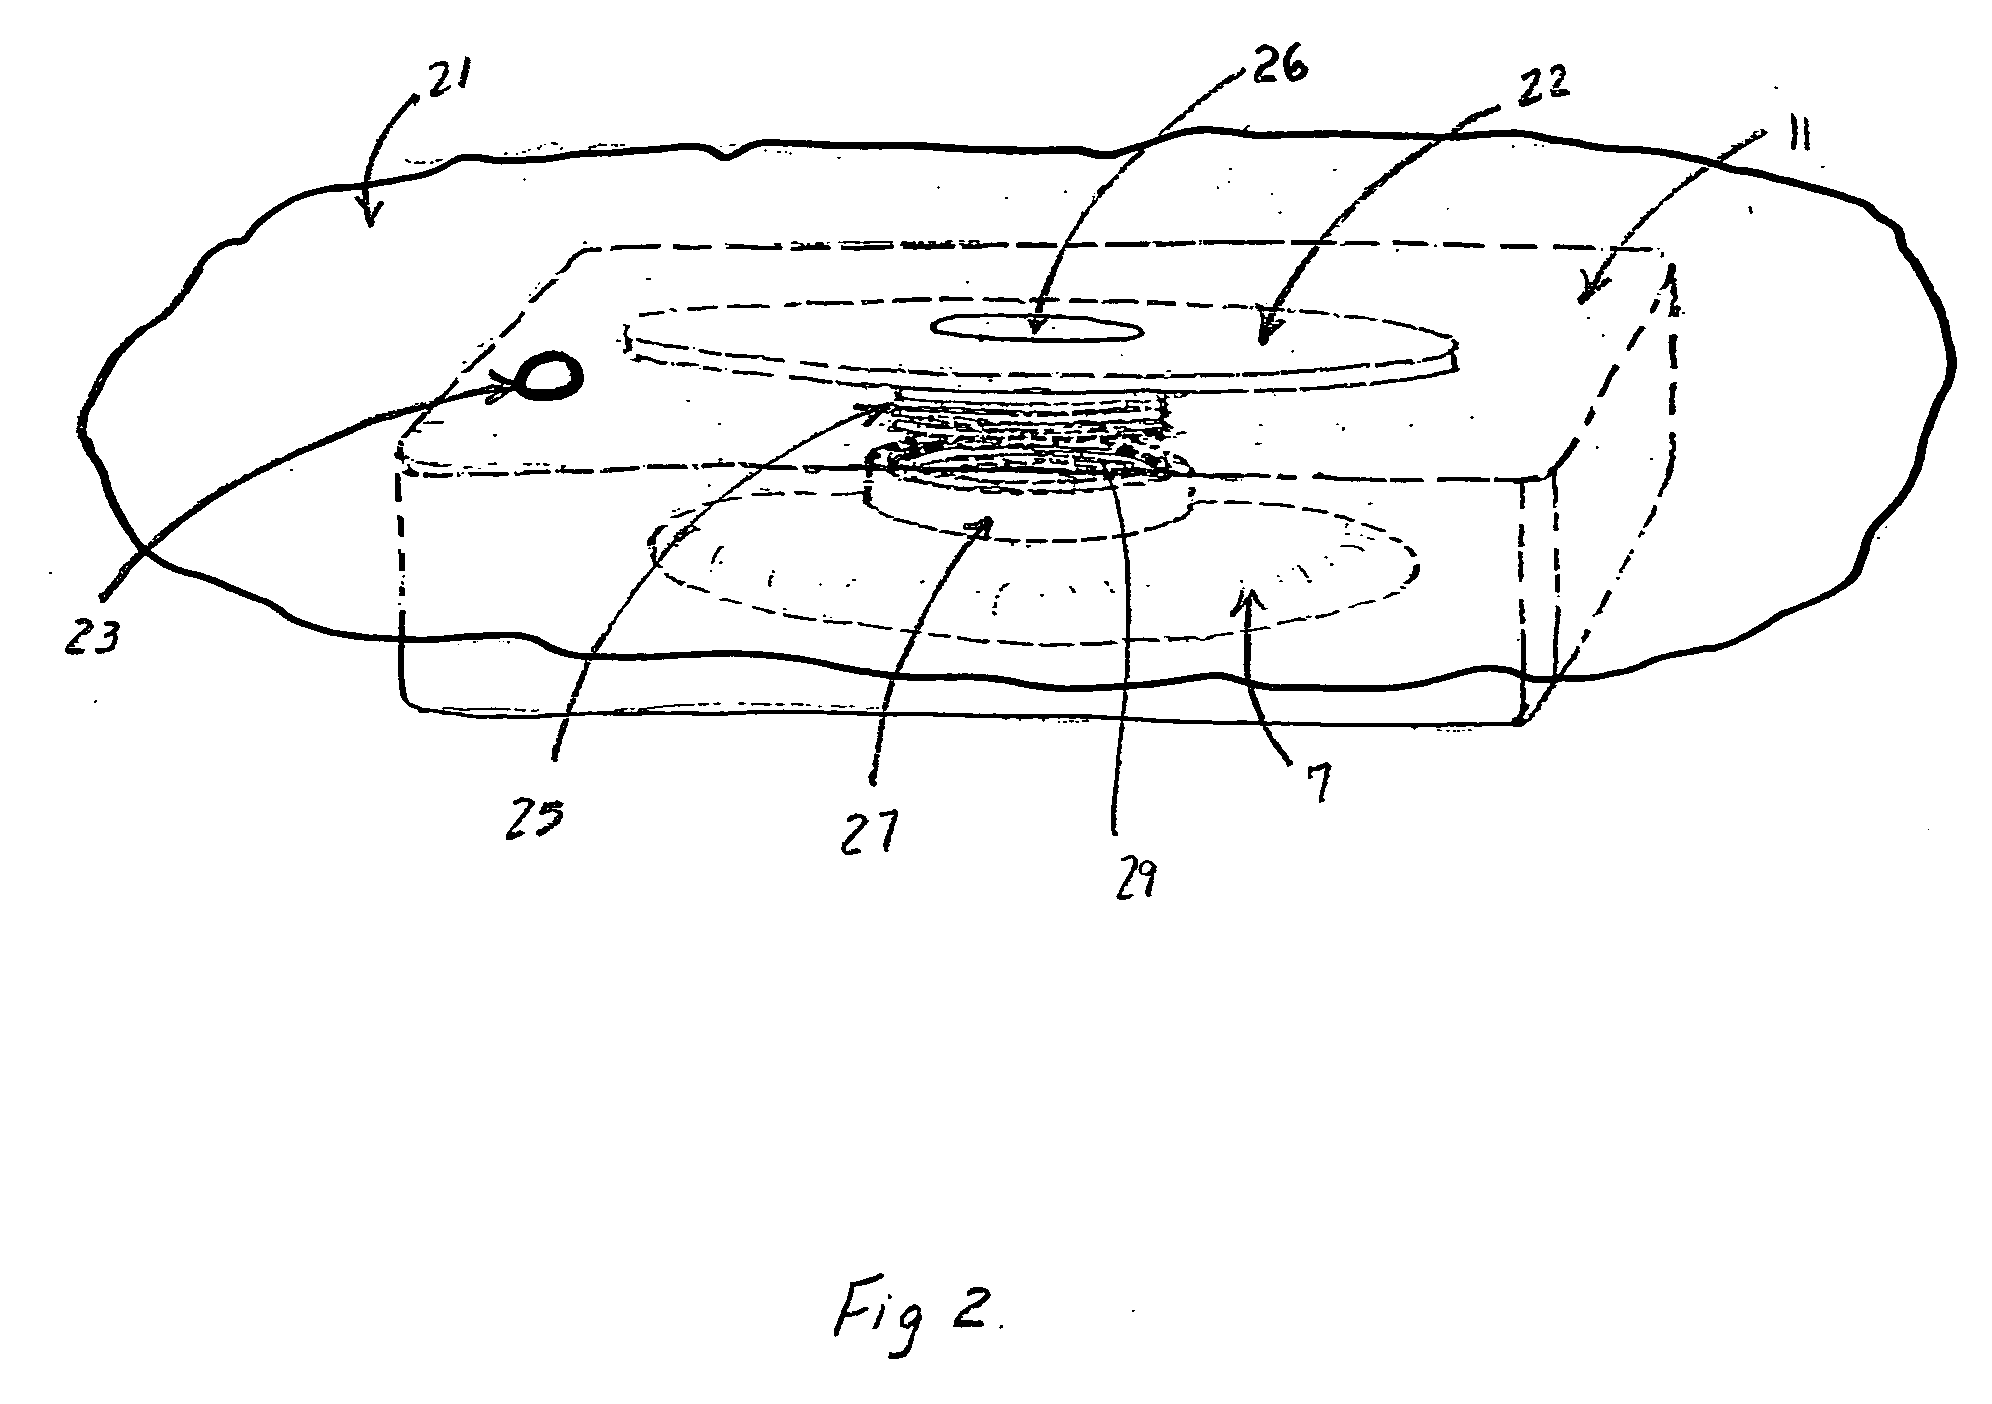 Fluid isolation device and method for treatment of fistulas